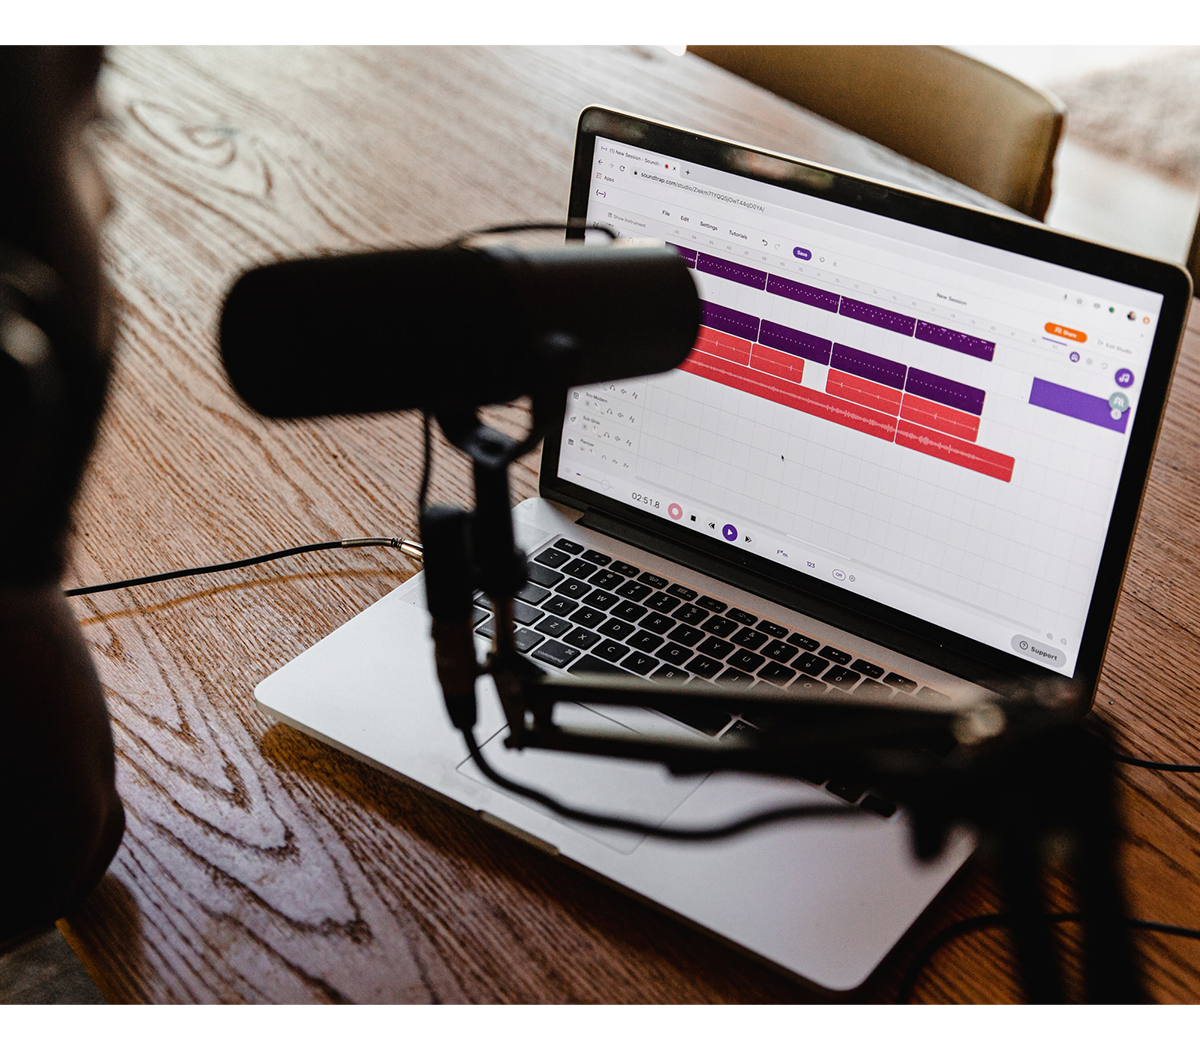 36 podcast statistics to get your audience listening.